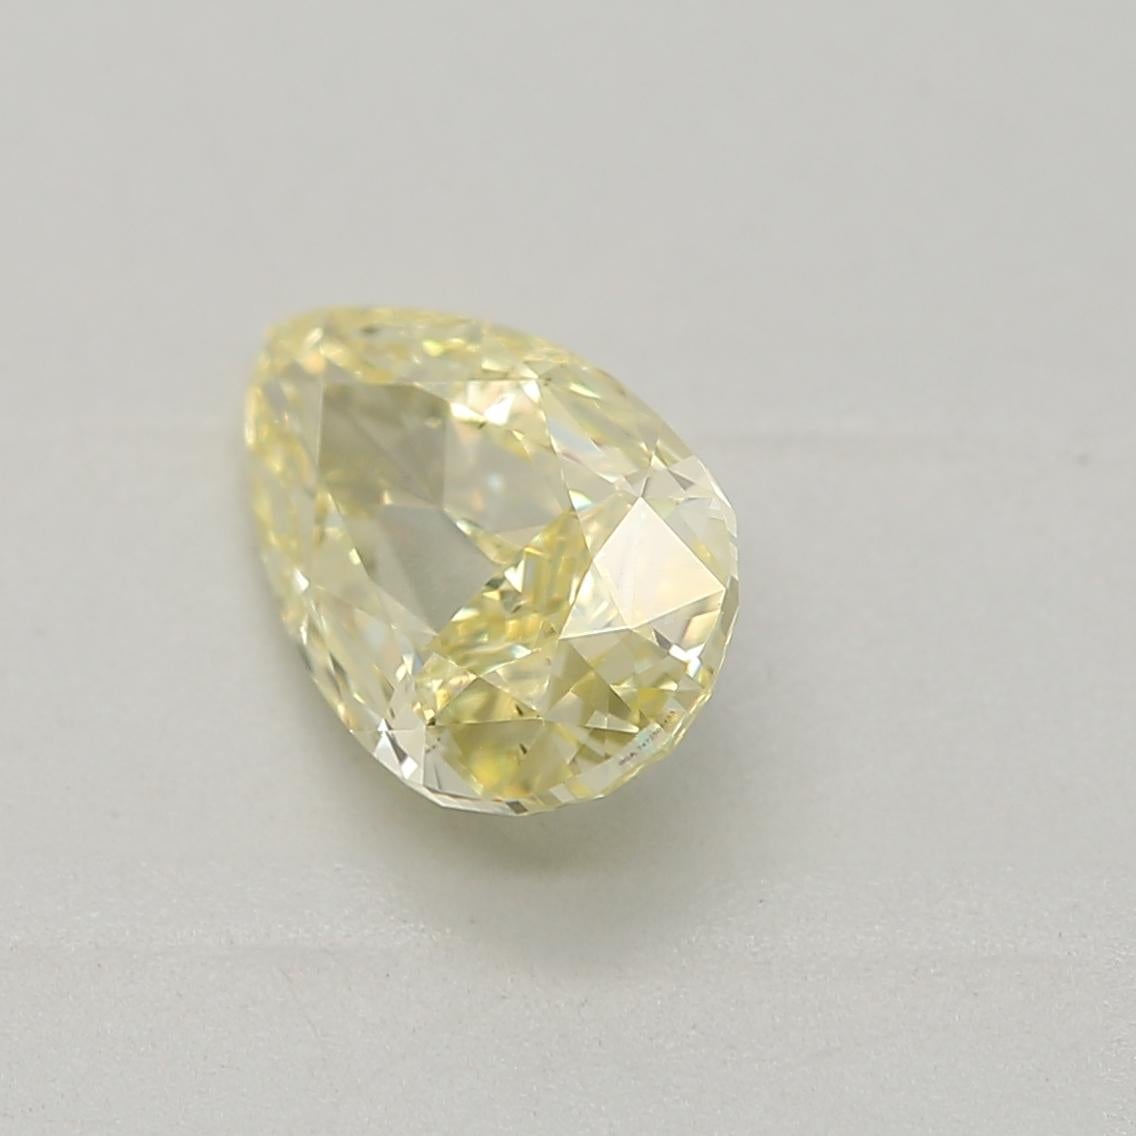 *100% NATURAL FANCY COLOUR DIAMOND*

✪ Diamond Details ✪

➛ Shape: Pear
➛ Colour Grade: Fancy Yellow
➛ Carat: 0.71
➛ Clarity: SI1
➛ GIA Certified 

^FEATURES OF THE DIAMOND^












Also, our GIA certified diamond is a diamond that has undergone